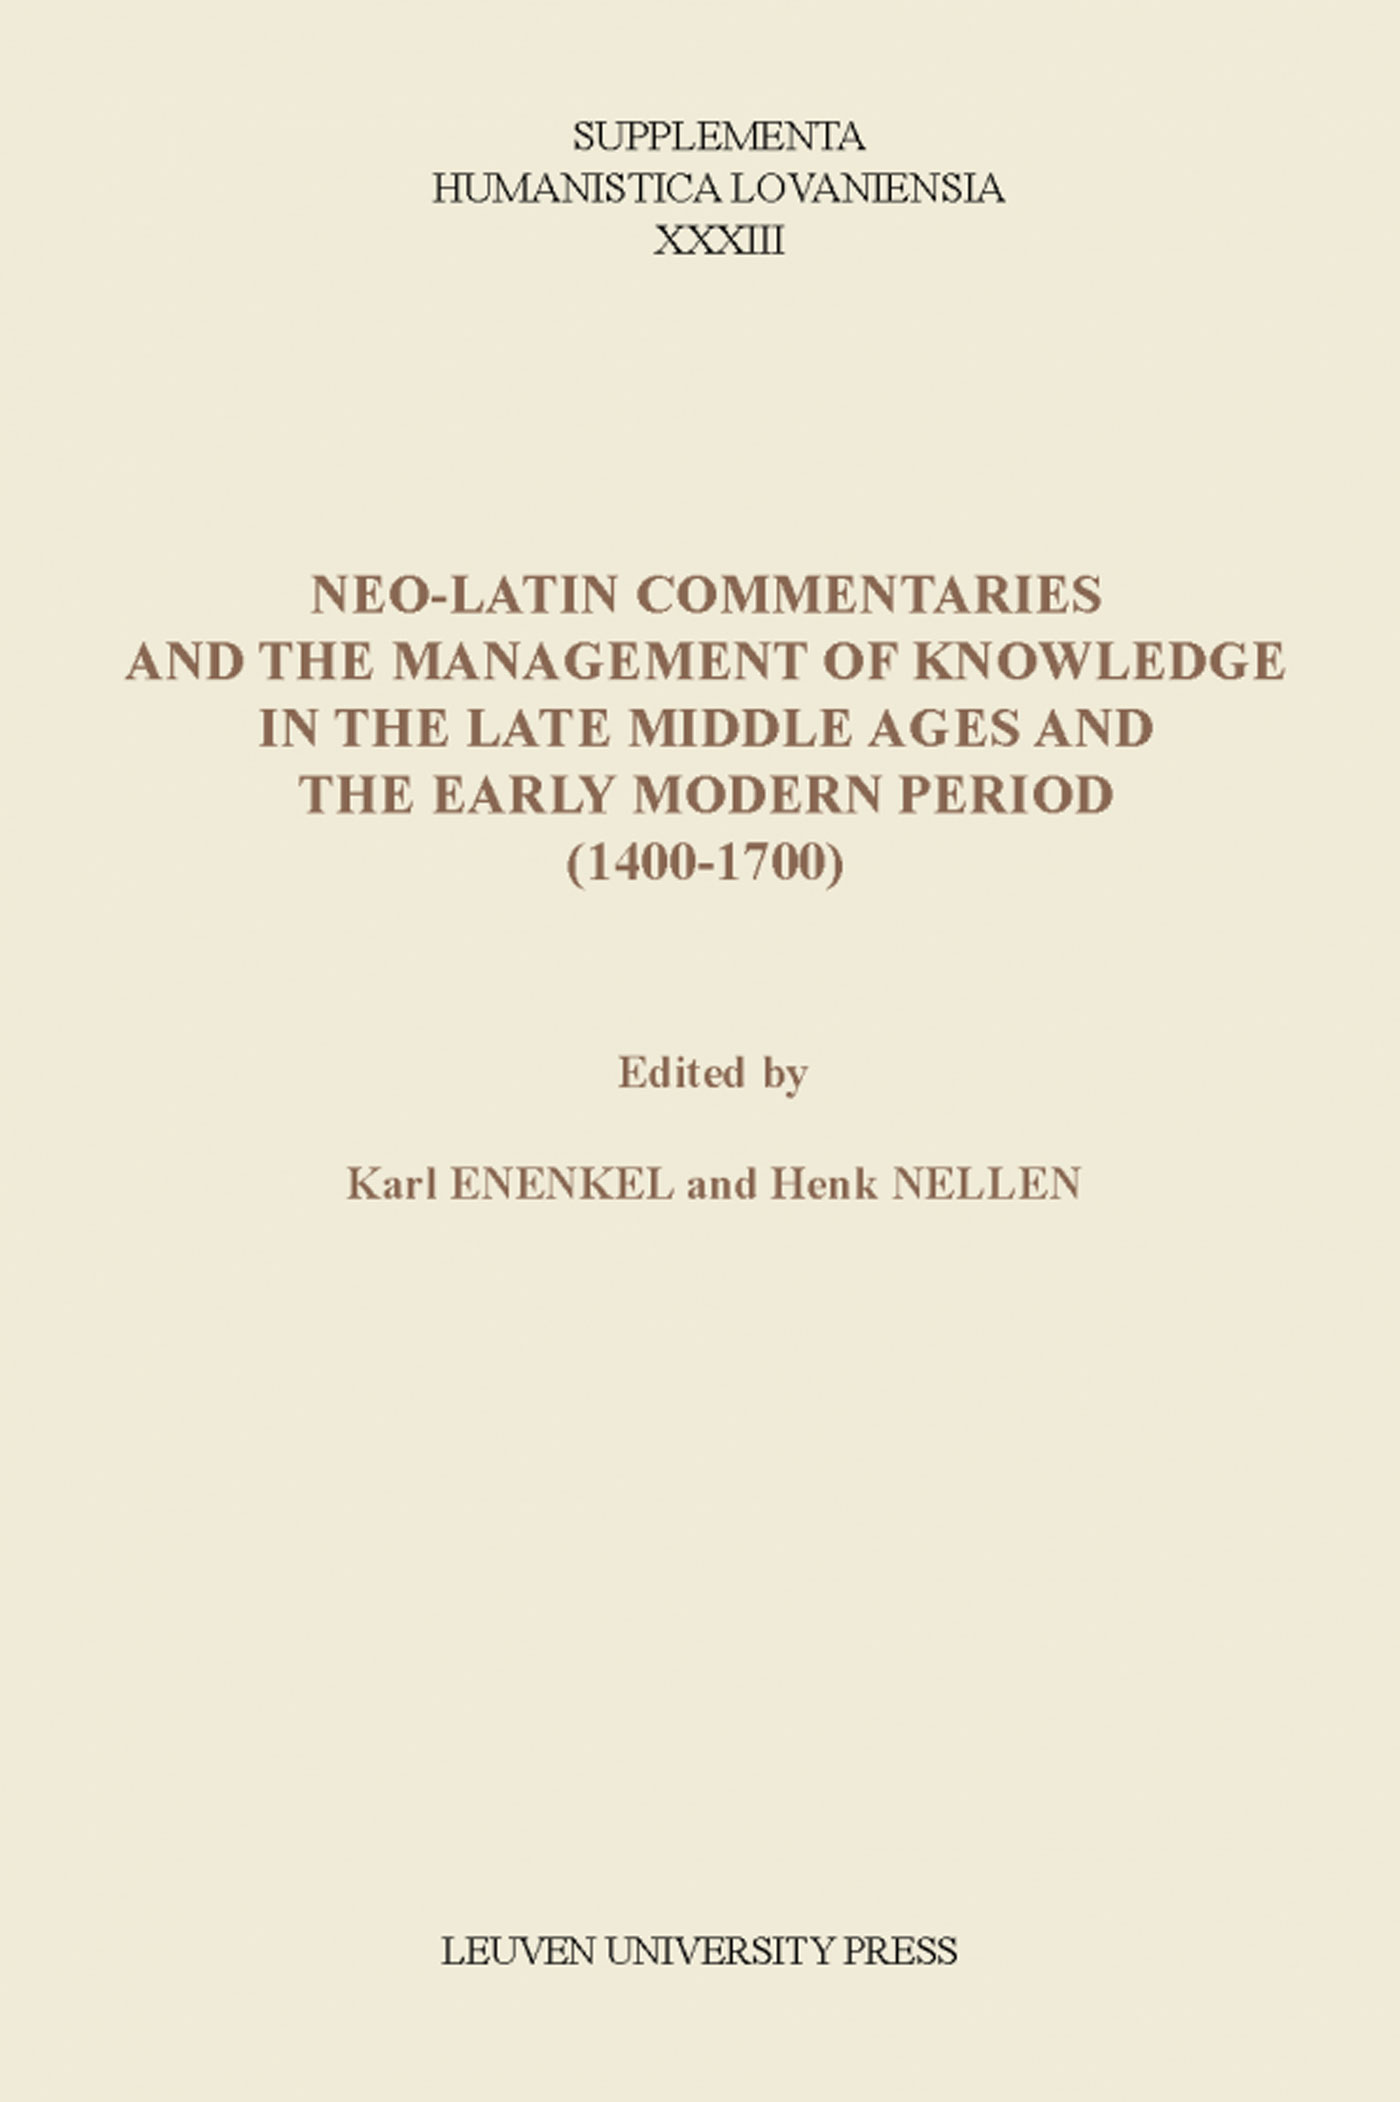 Neo-Latin commentaries and the management of knowledge in the late middle ages and the Early modern